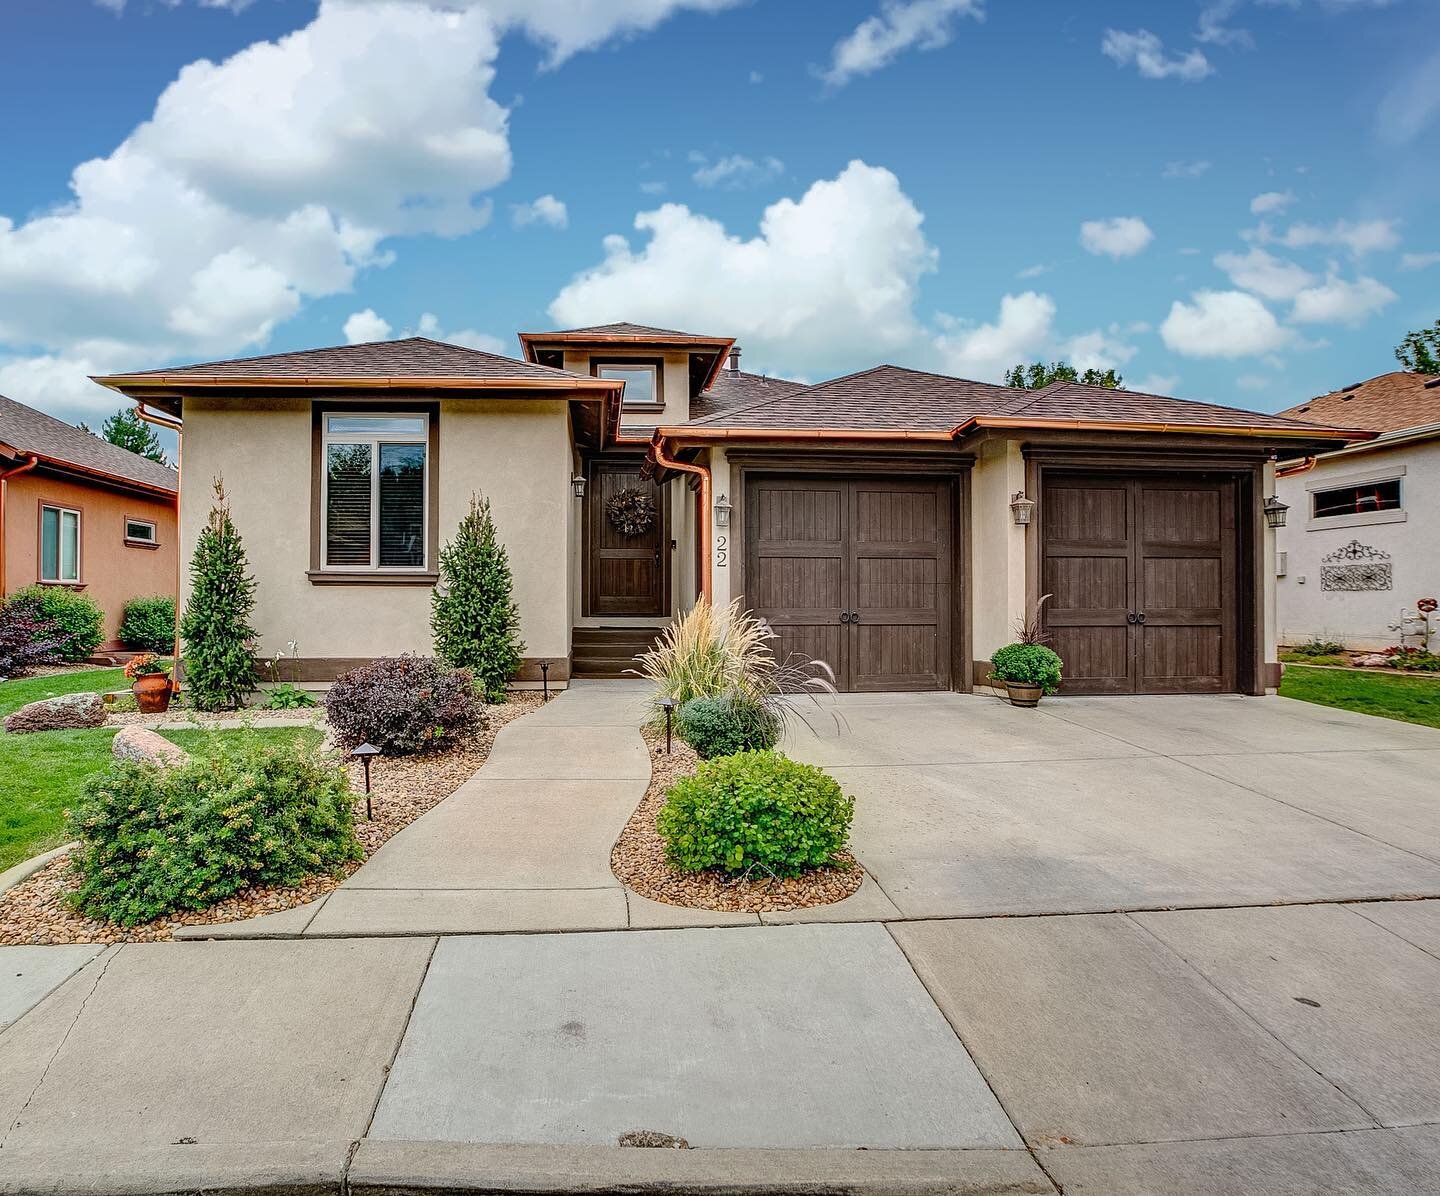 Fort Collins luxury patio home has amazing woodwork, built-ins, and even a theater. See Mary Ann Ozmina for details